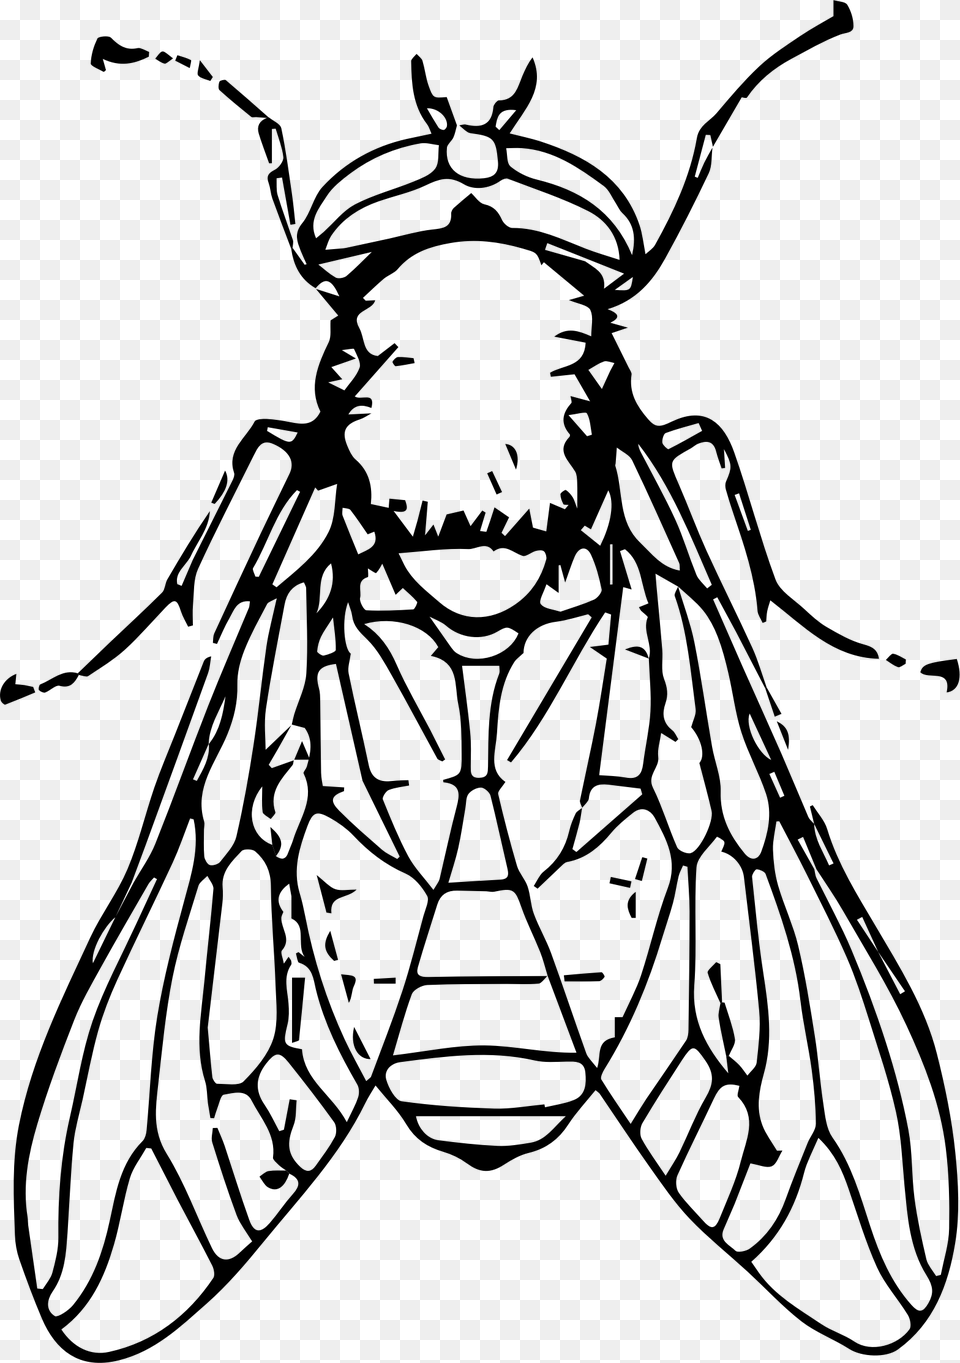 Black Horse Fly File Clip Art Black And White Fly, Gray Free Png Download